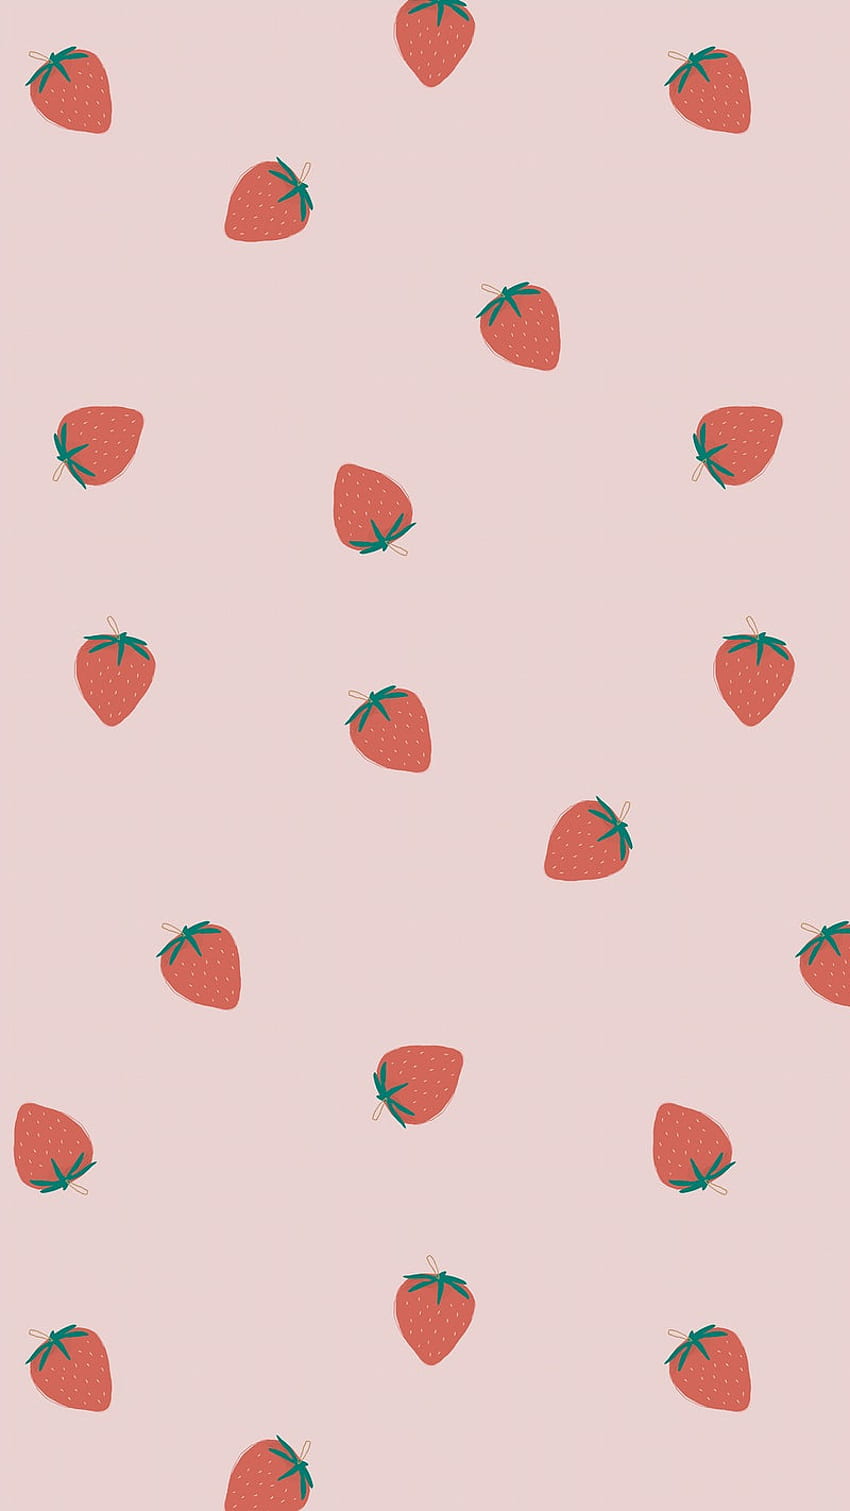 Psd hand drawn strawberry pattern pastel pink. Royalty stock Illustration. High Resolution graphic HD phone wallpaper